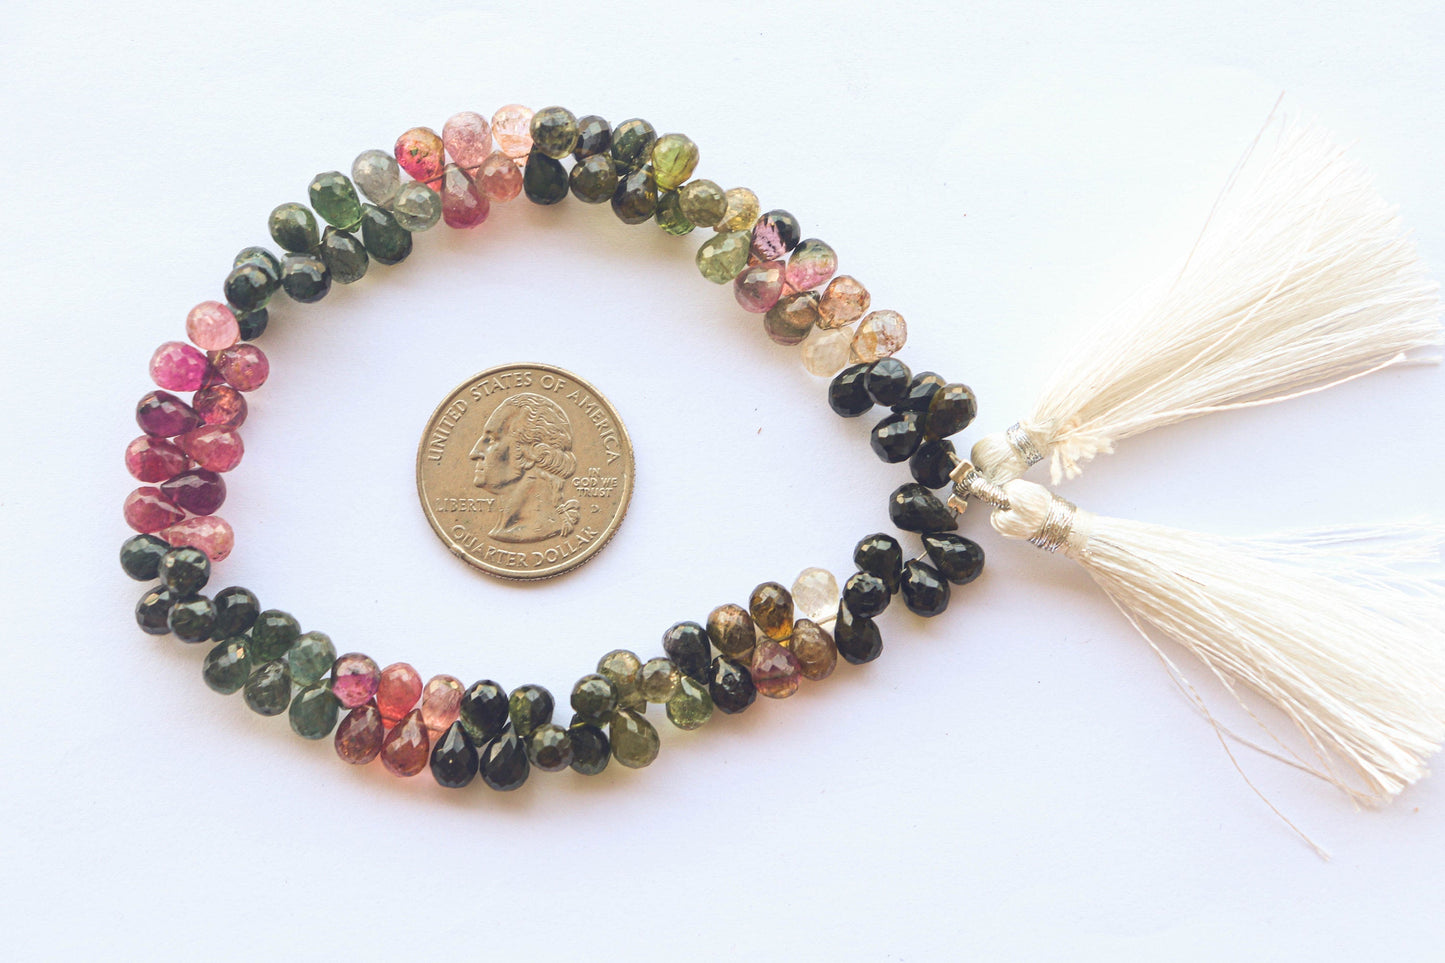 Multi Tourmaline Faceted Drops | 5x7mm | 9 inch | 89 Pieces | Natural Tourmaline Gemstone | Beadsforyourjewellery | BFYJ896 Beadsforyourjewelry